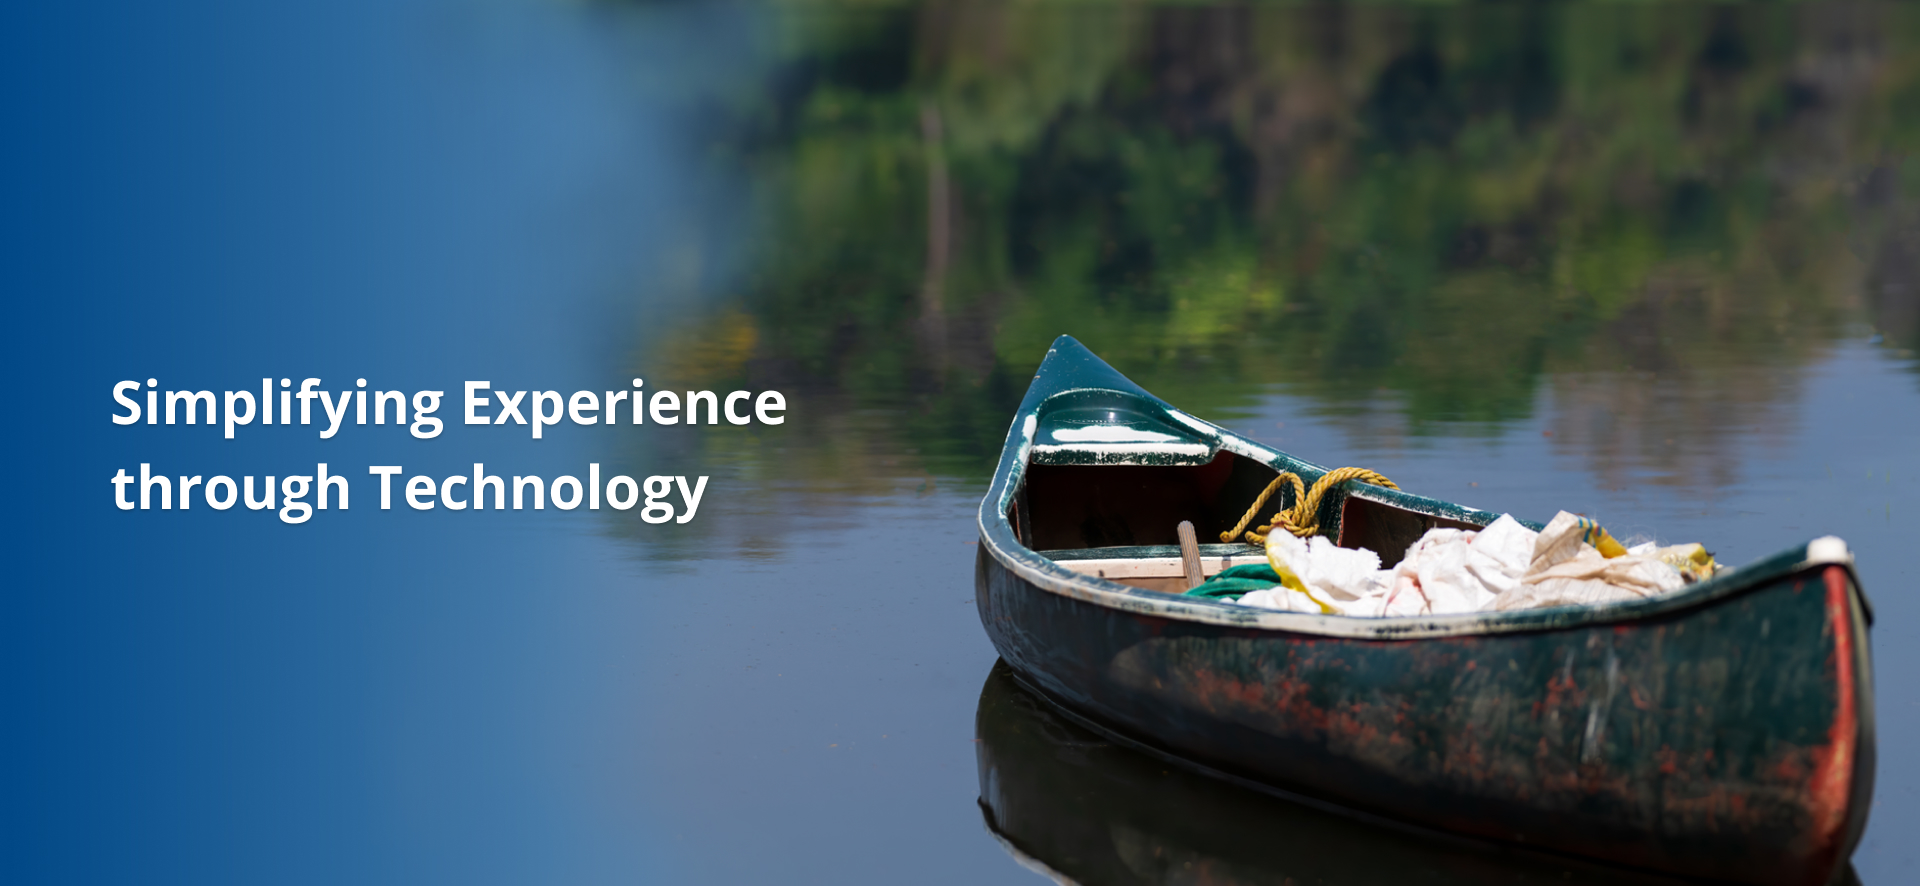 Simplifying Experience through Technology